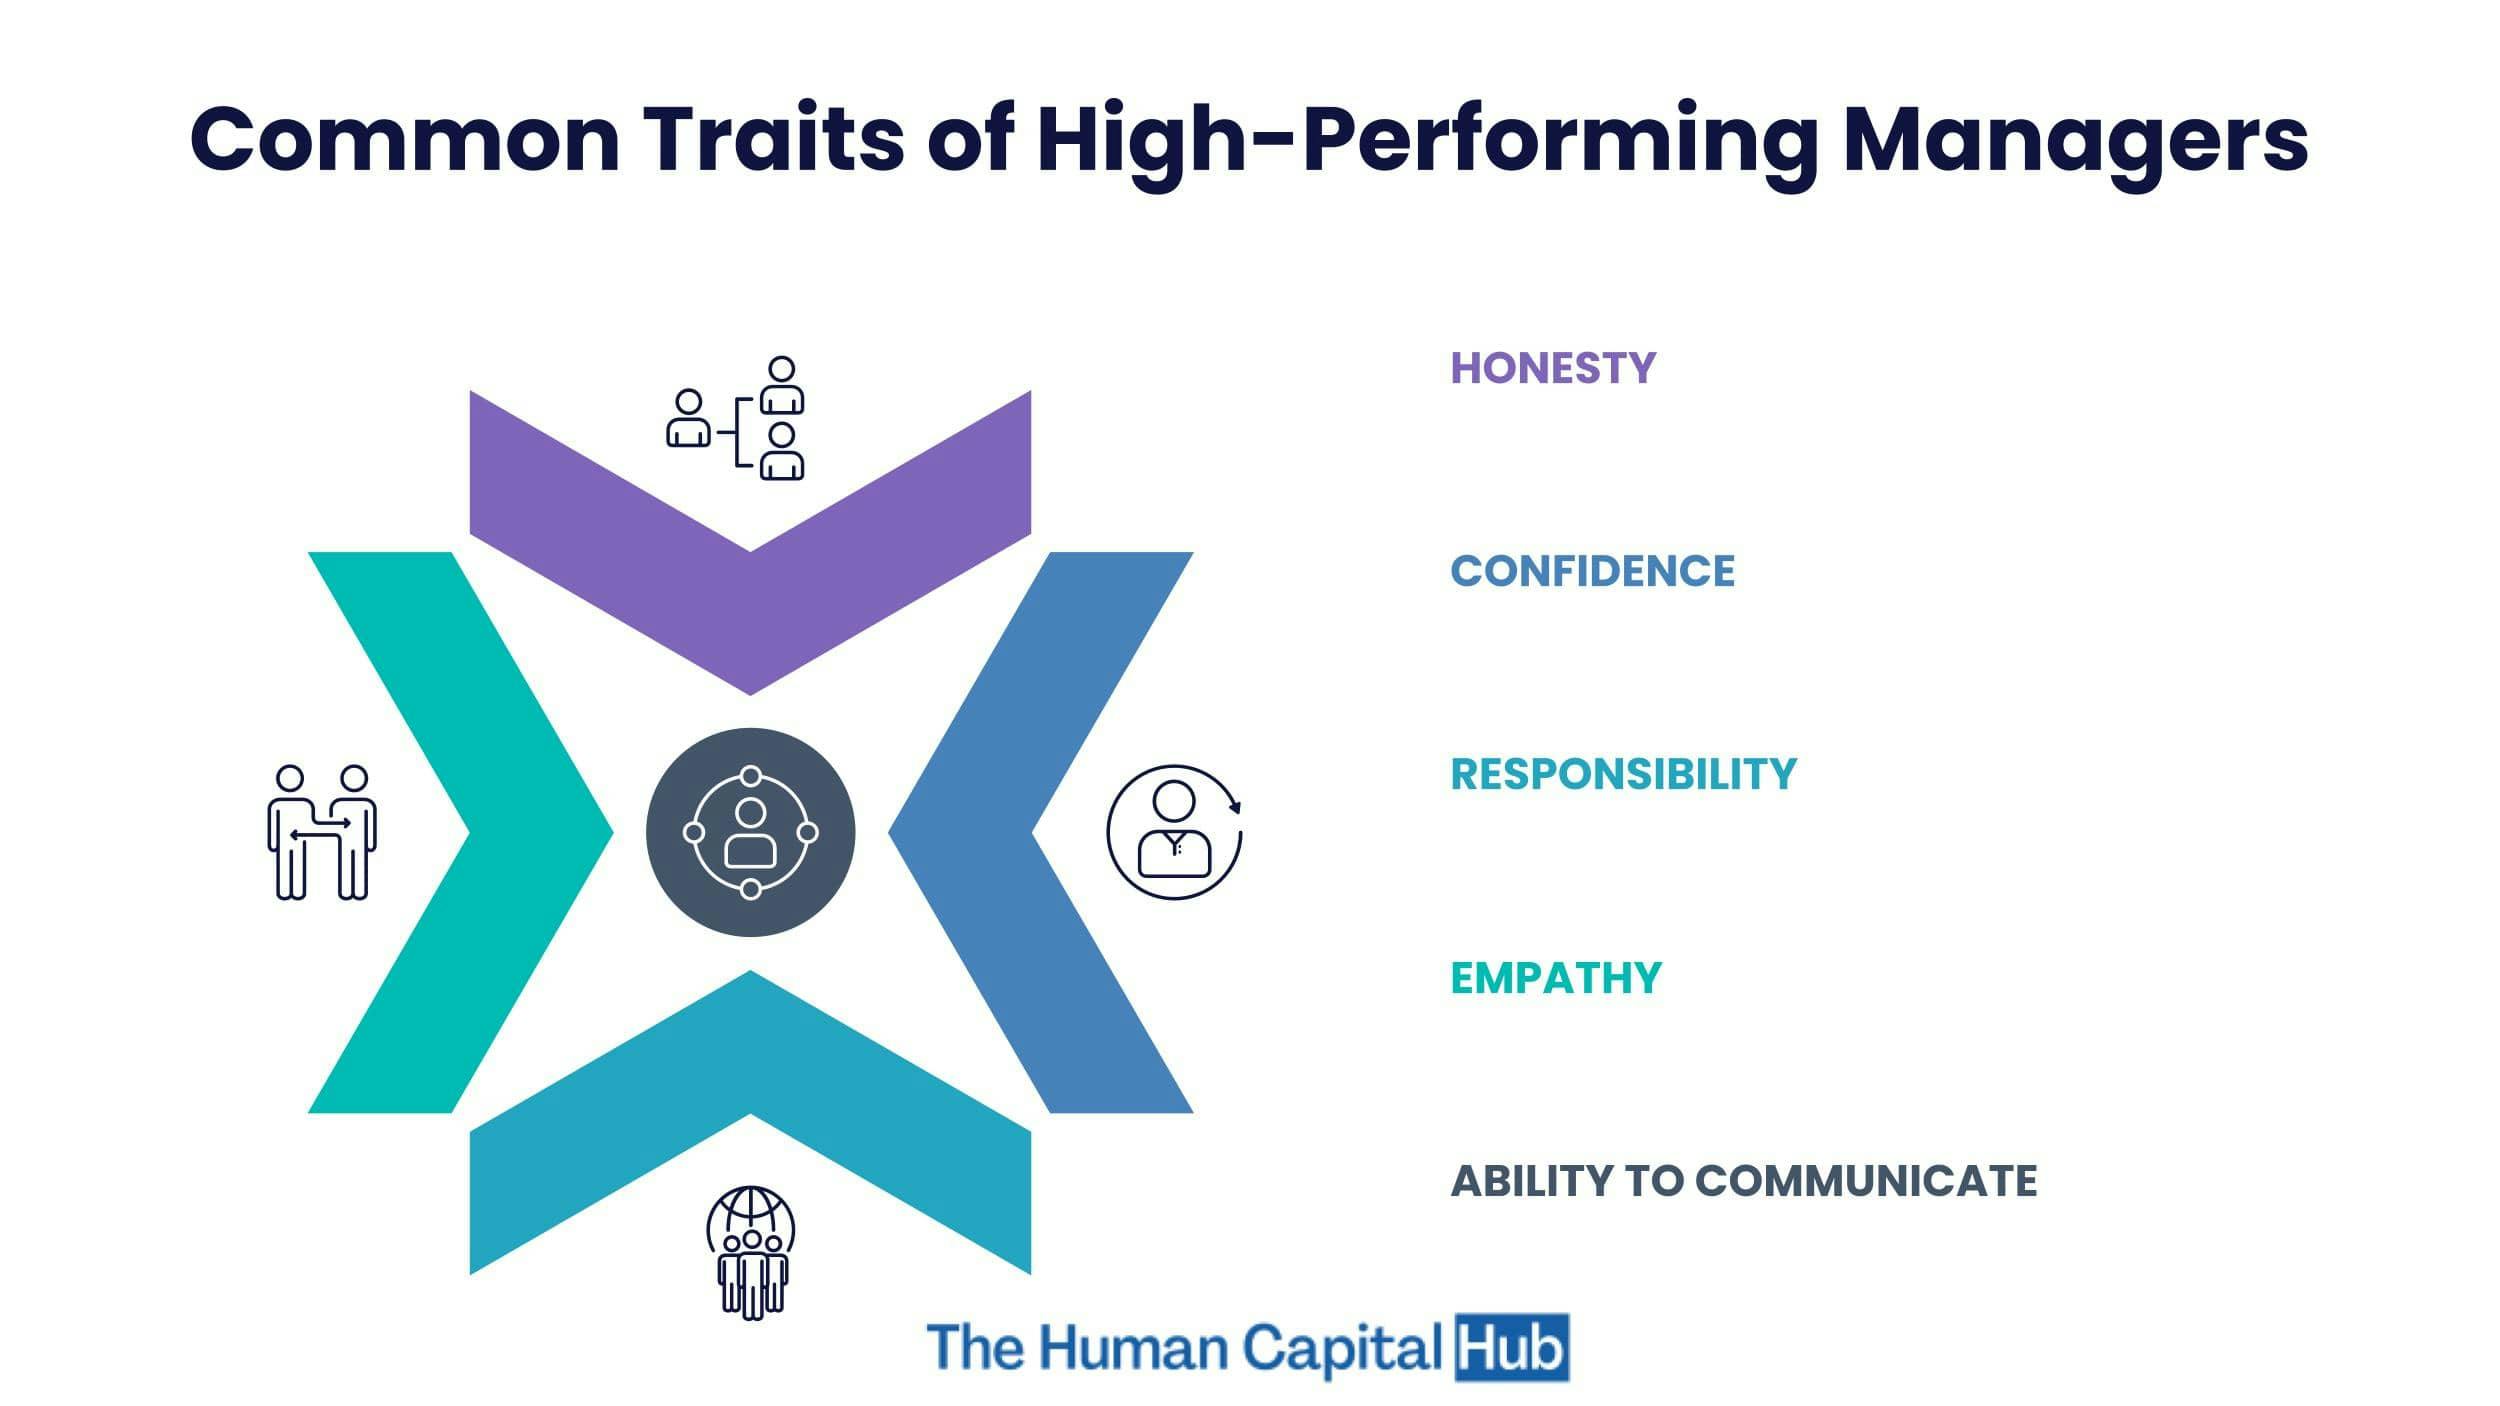 Common traits of high-performing managers